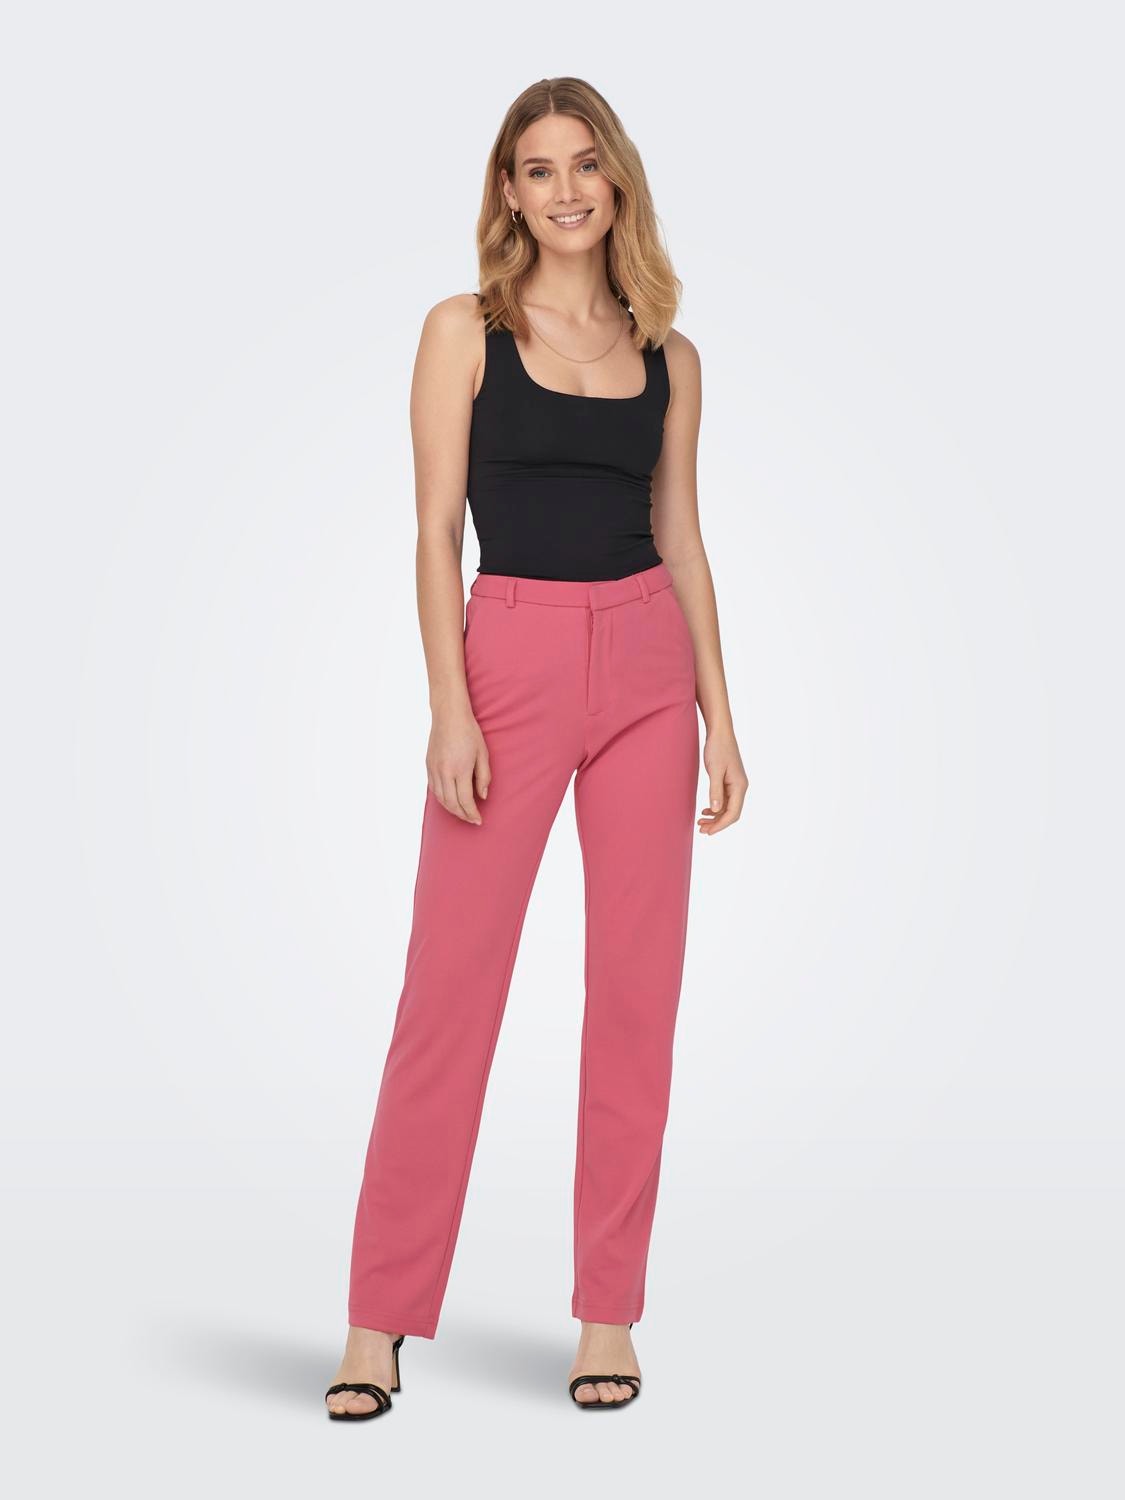 ONLY Straight fitted Trousers -Desert Rose - 15266403